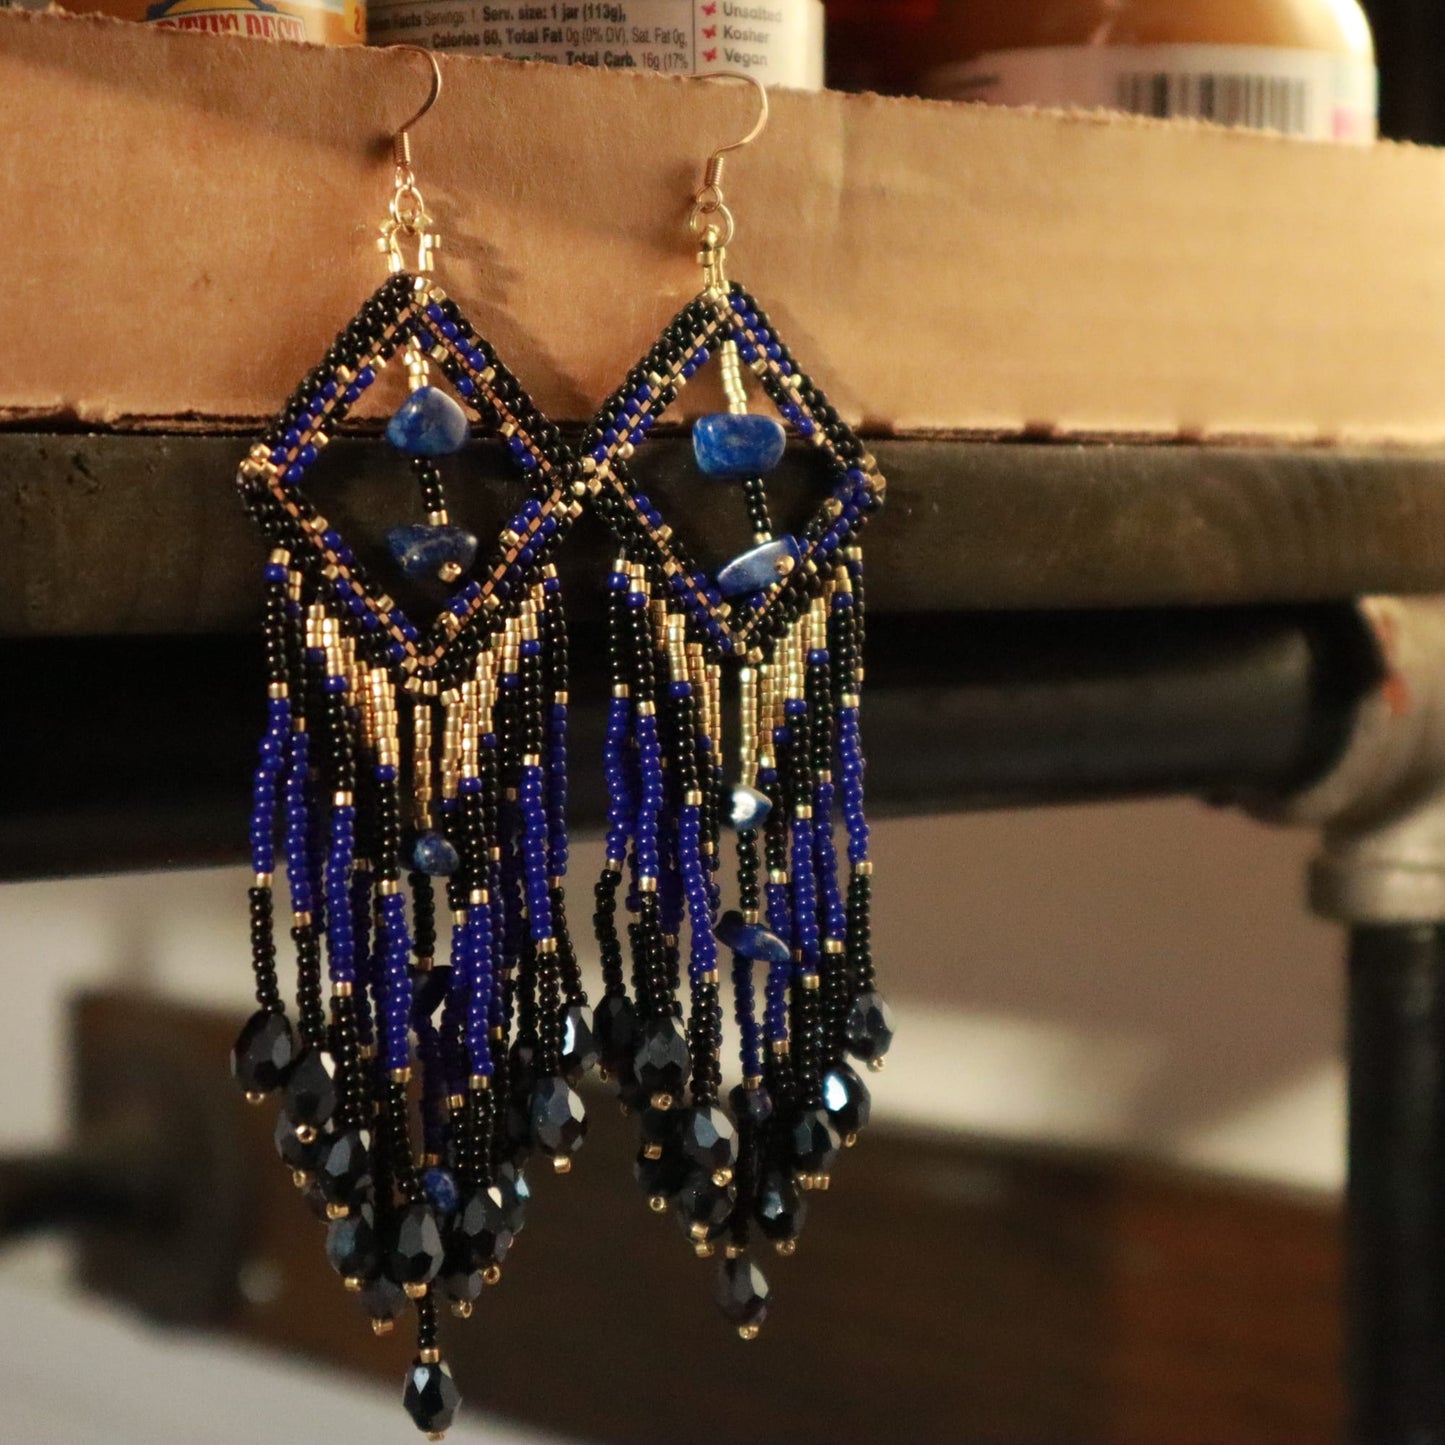 Elegant beaded fringe earrings,Blue, black and Good color with rock. Gift for her.